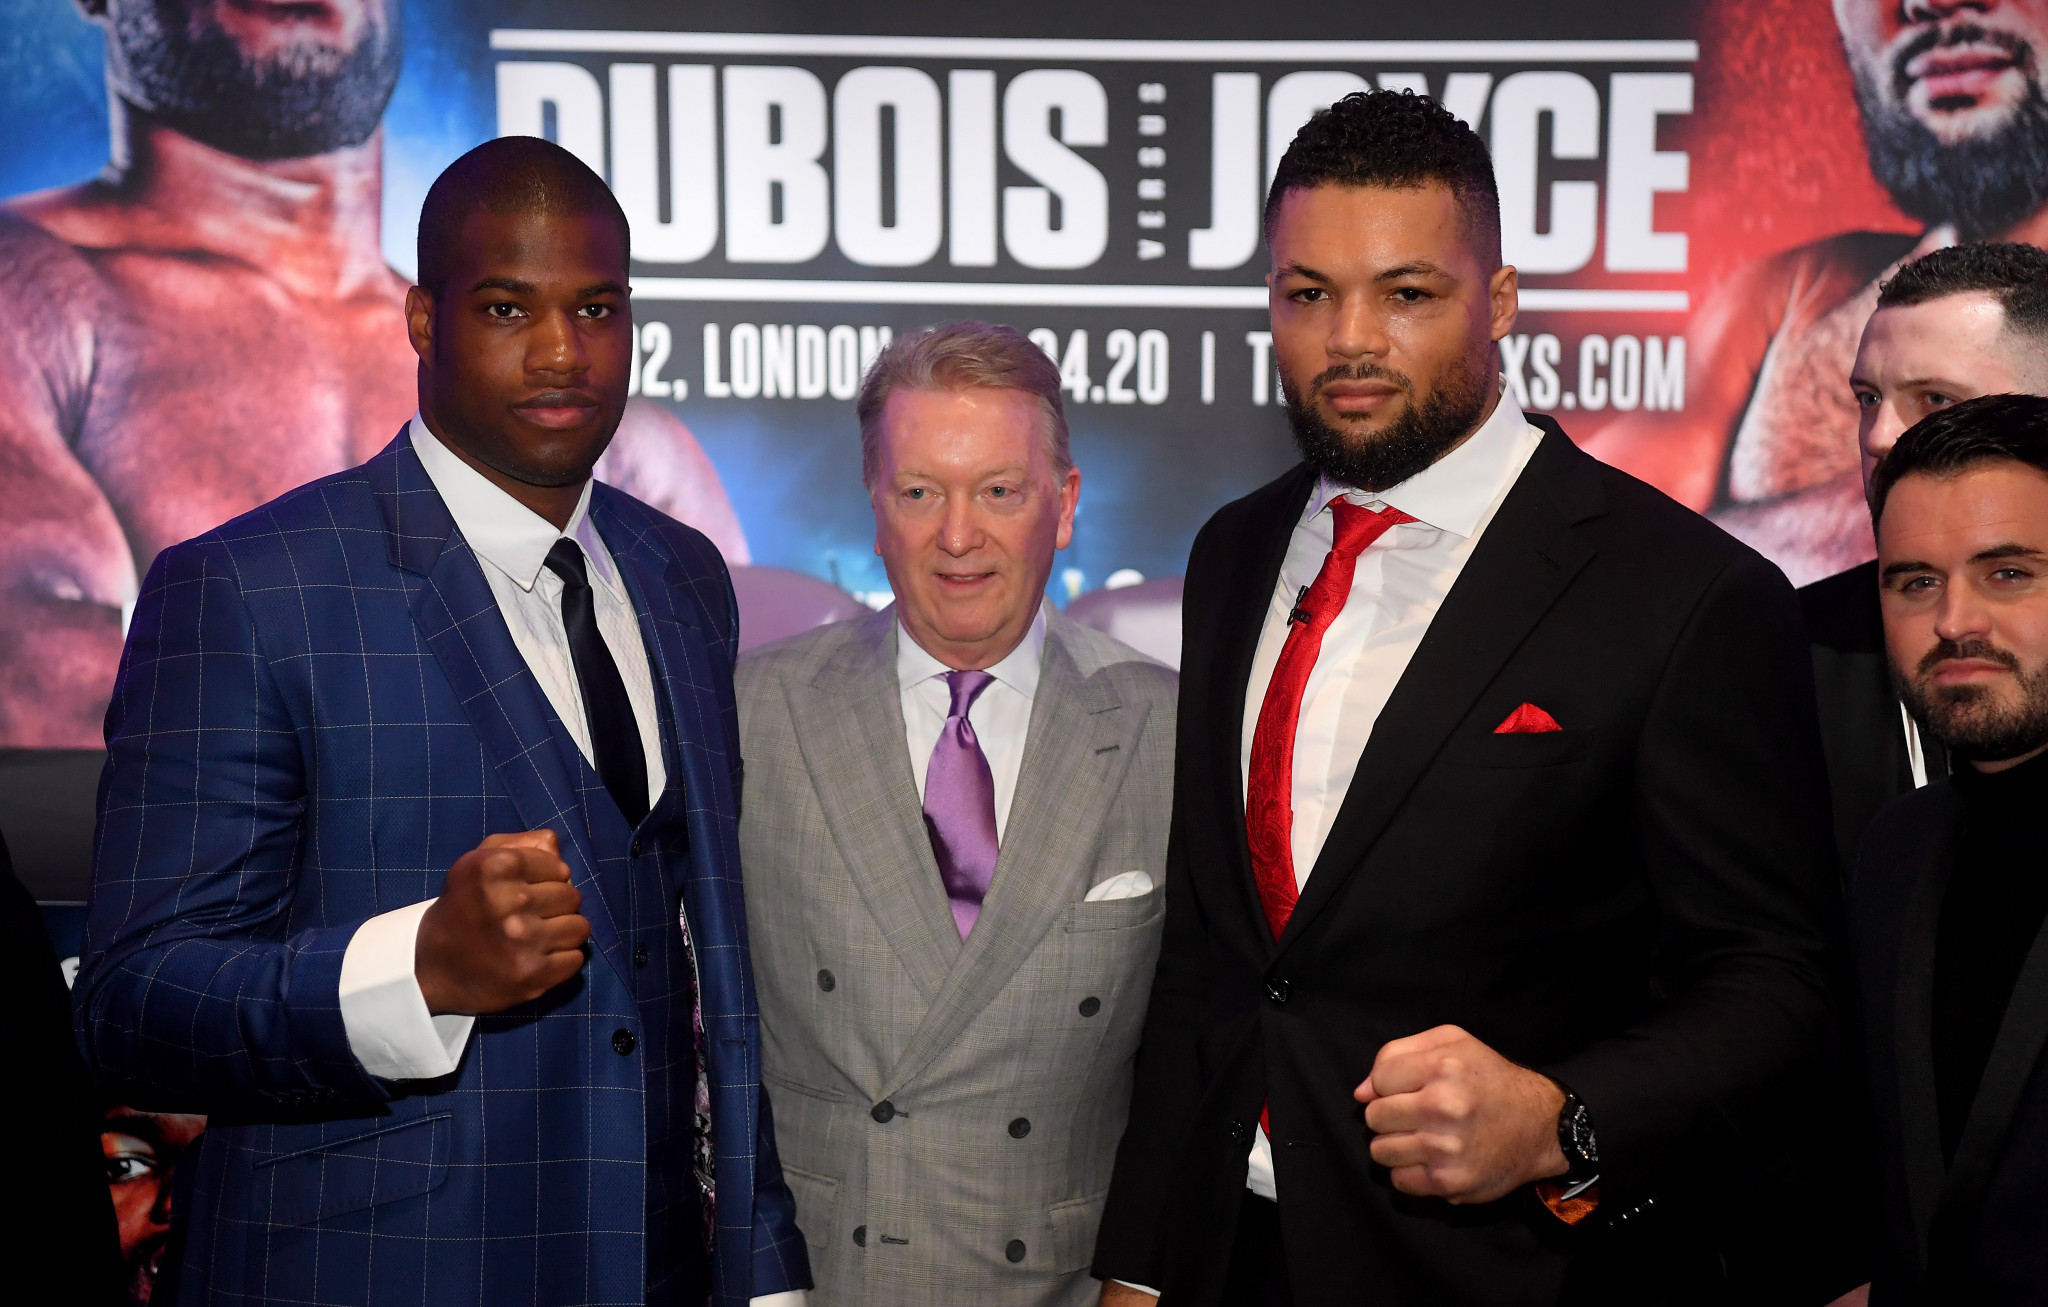 Daniel Dubois, left, and Joe Joyce have had to wait many months to finally fight because of coronavirus-related postponements ©Getty Images